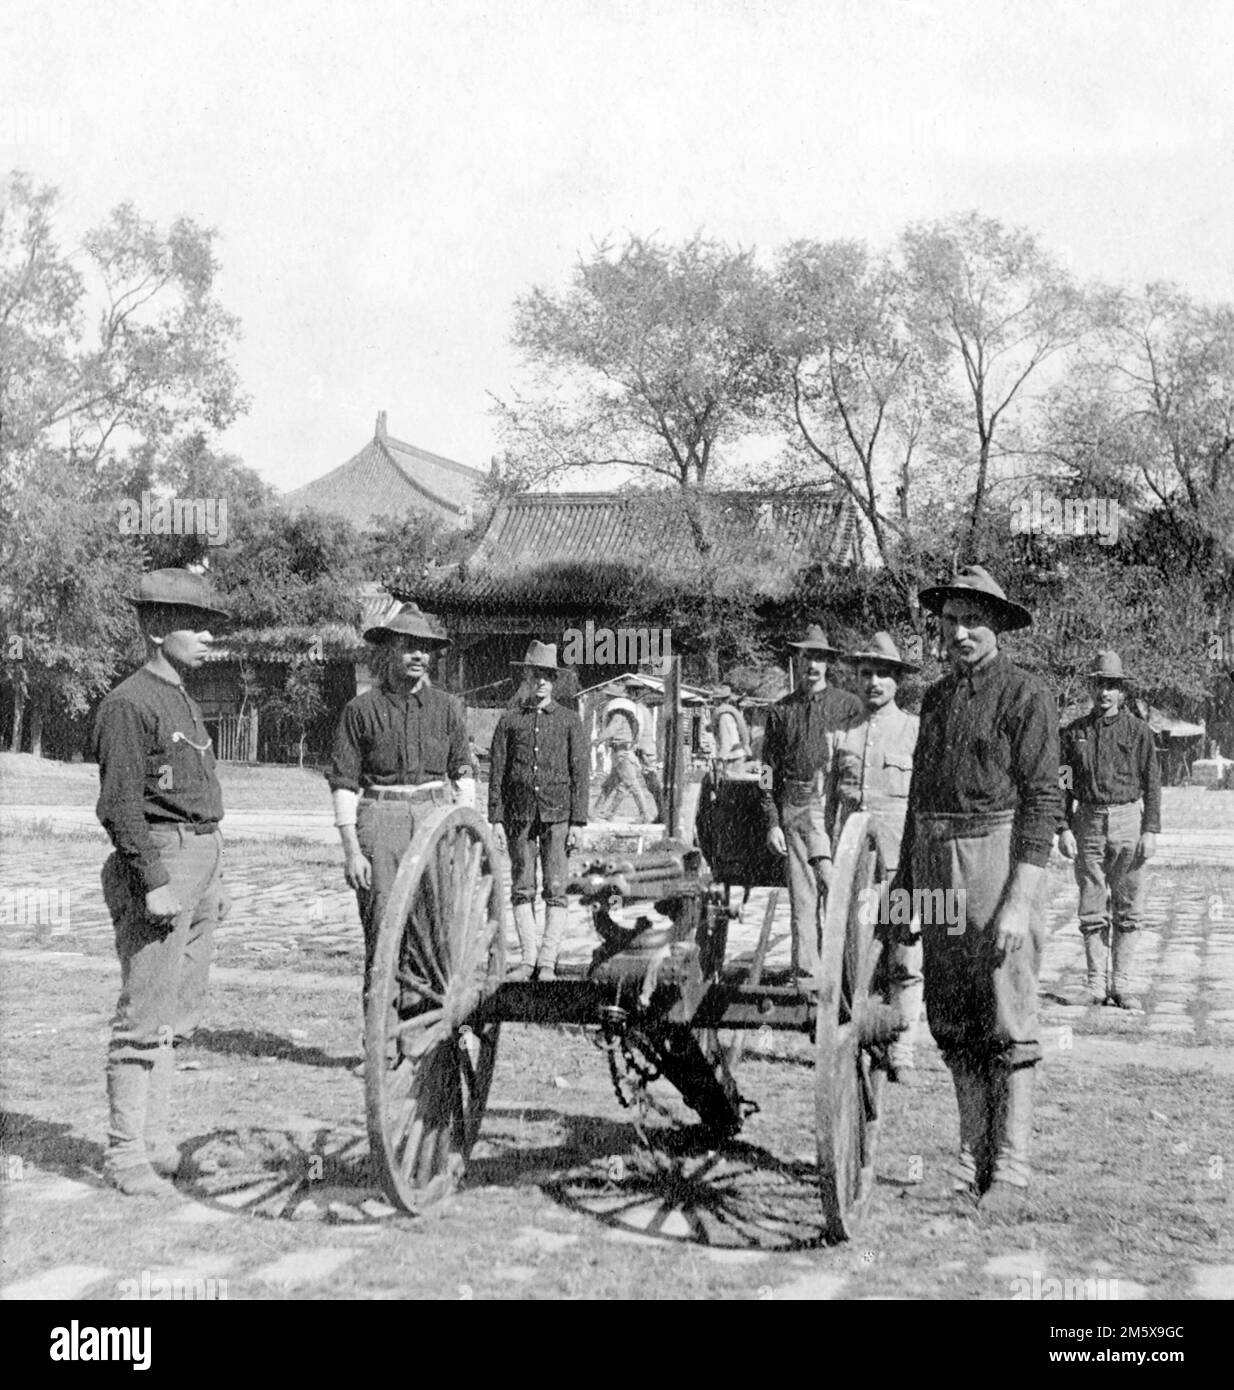 Boxer Rebellion. 9th U.S. Infantry gattling gun detachment in the  court of the Forbidden City, Peking, China. Photo by Keystone View Company., 1900 Stock Photo